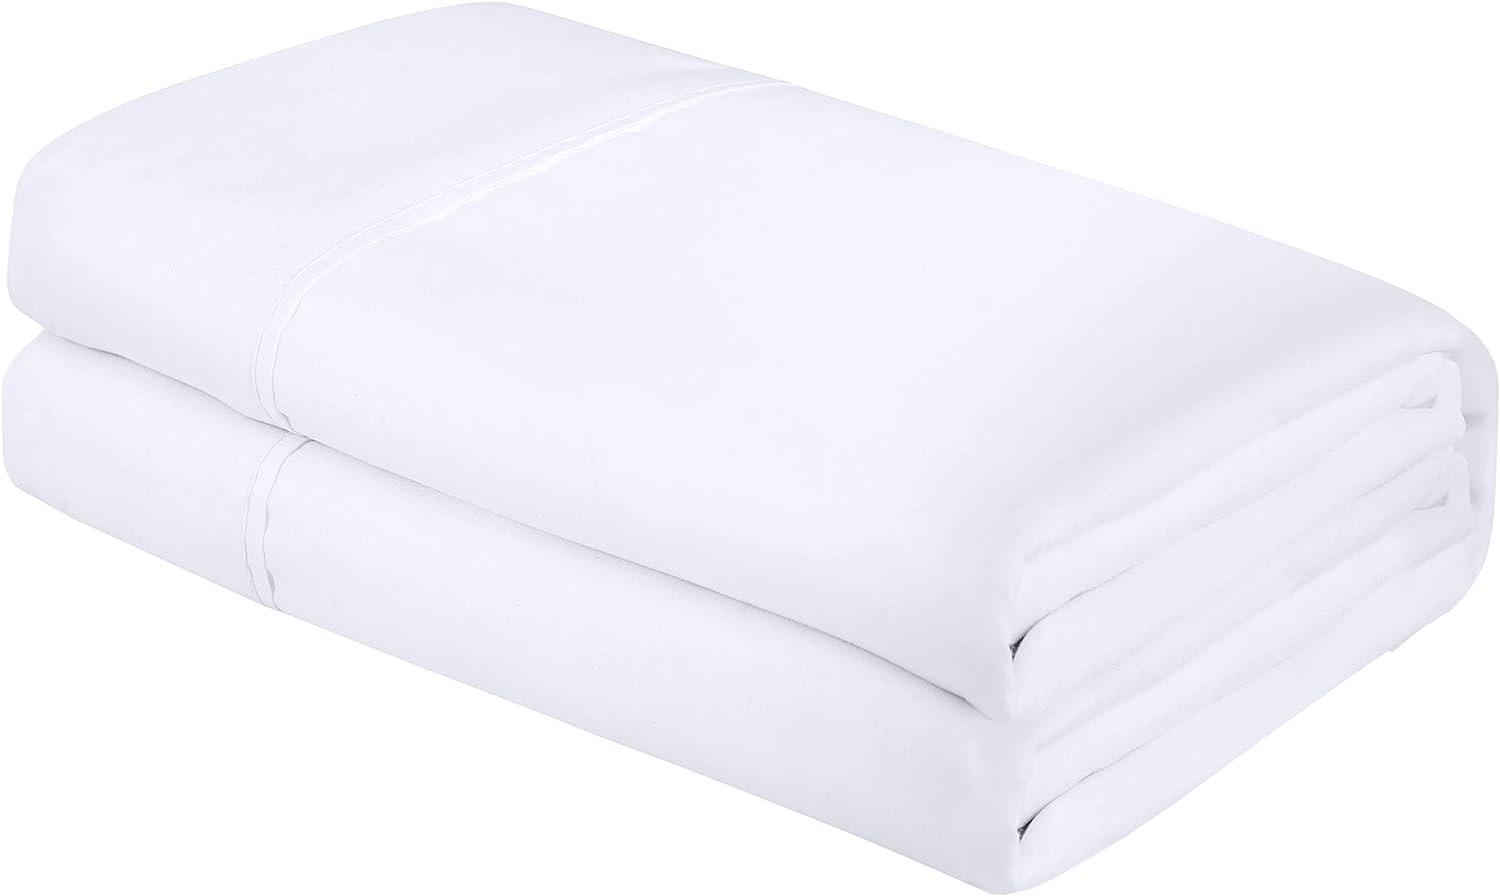 ROYALE LINENS Full Size Flat Sheet Only - Brushed 1800 Microfiber - Ultra Soft & Breathable - Wrinkle & Stain Resistant - Hotel Quality Flat Sheet Sold Separately - Top Sheet for Bed - (Full, White)